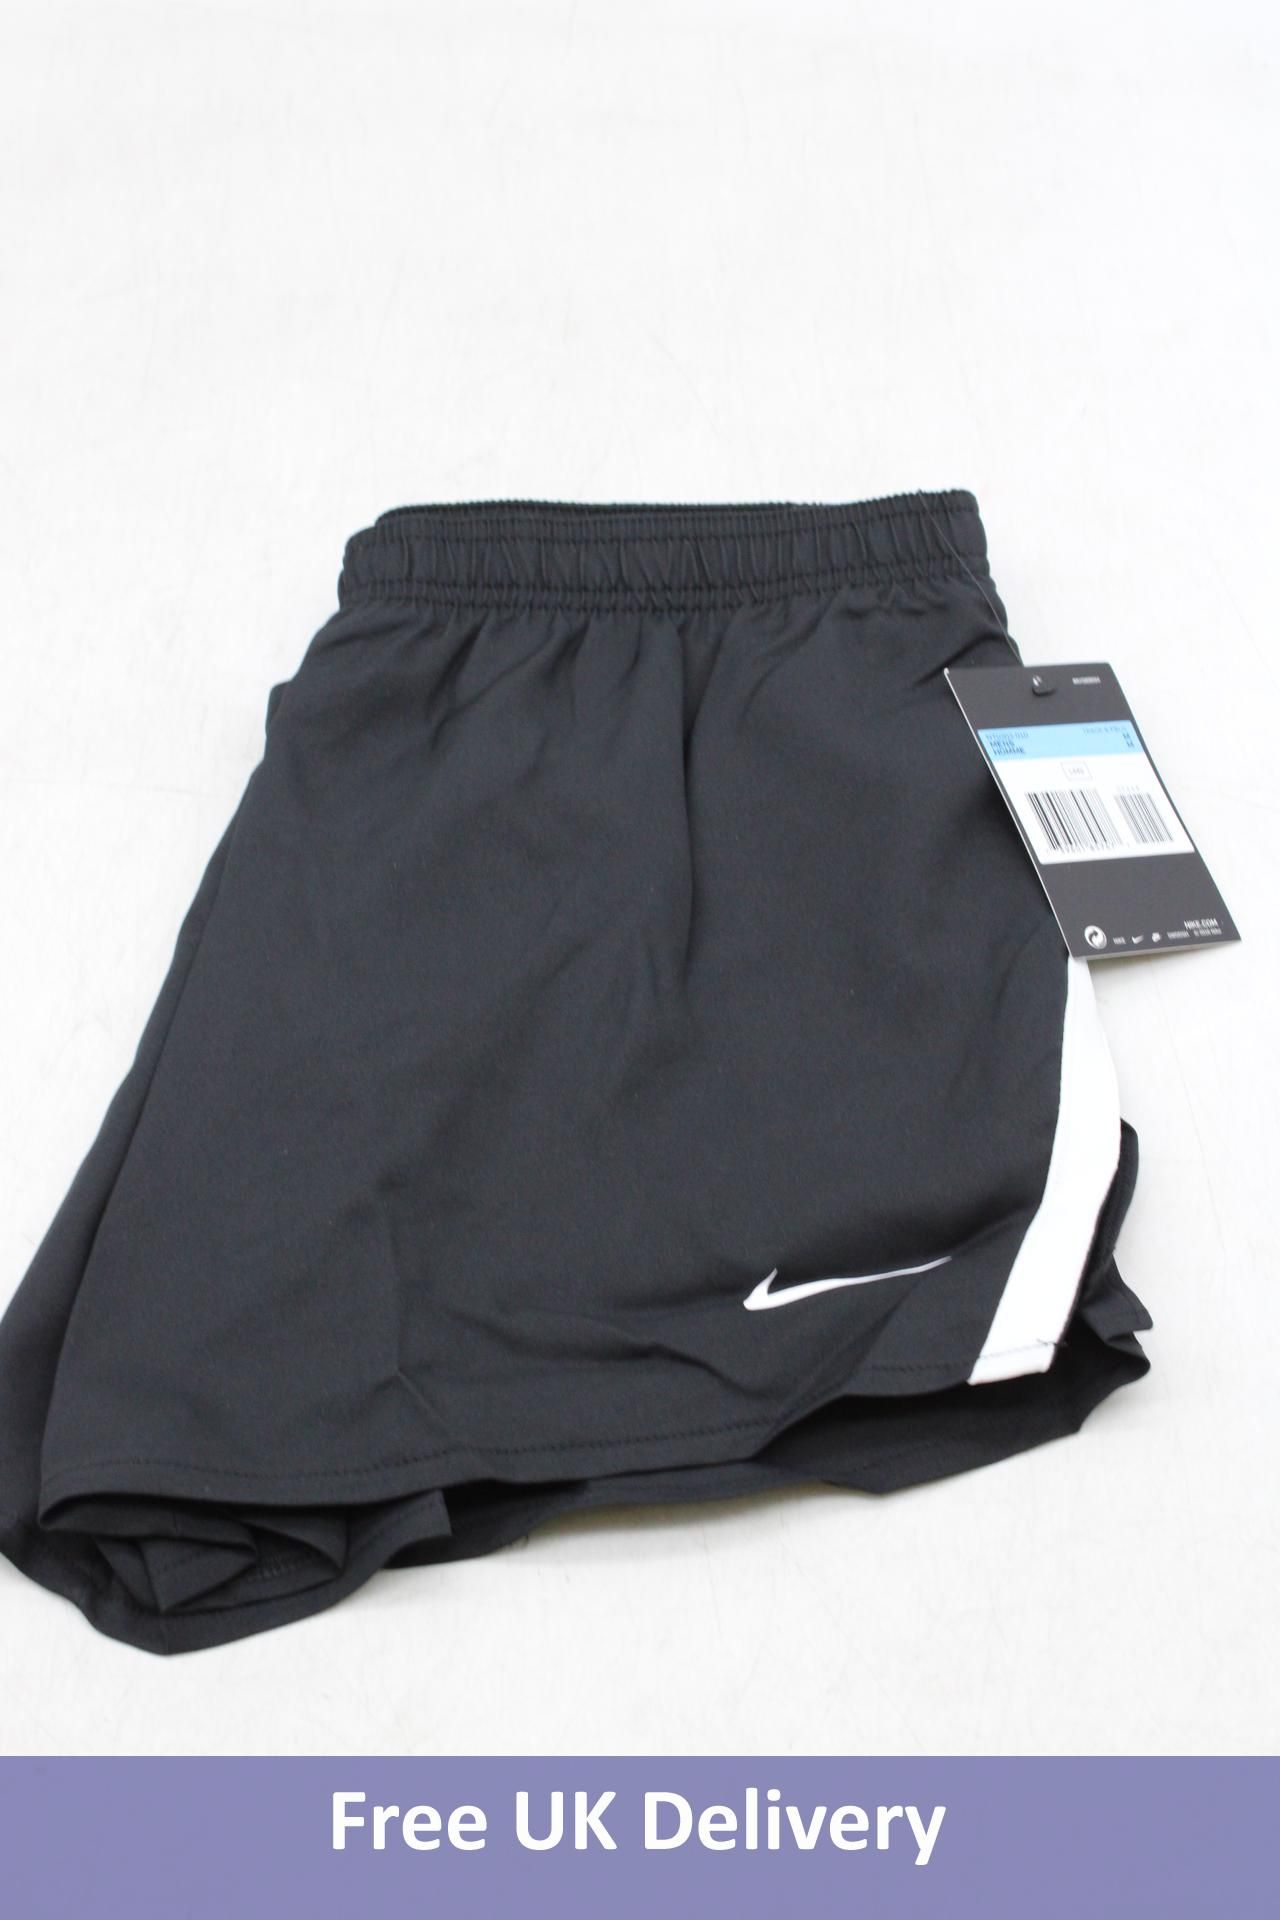 Five Pairs of Nike Track & Field 2" Running Shorts, Black, X-Large